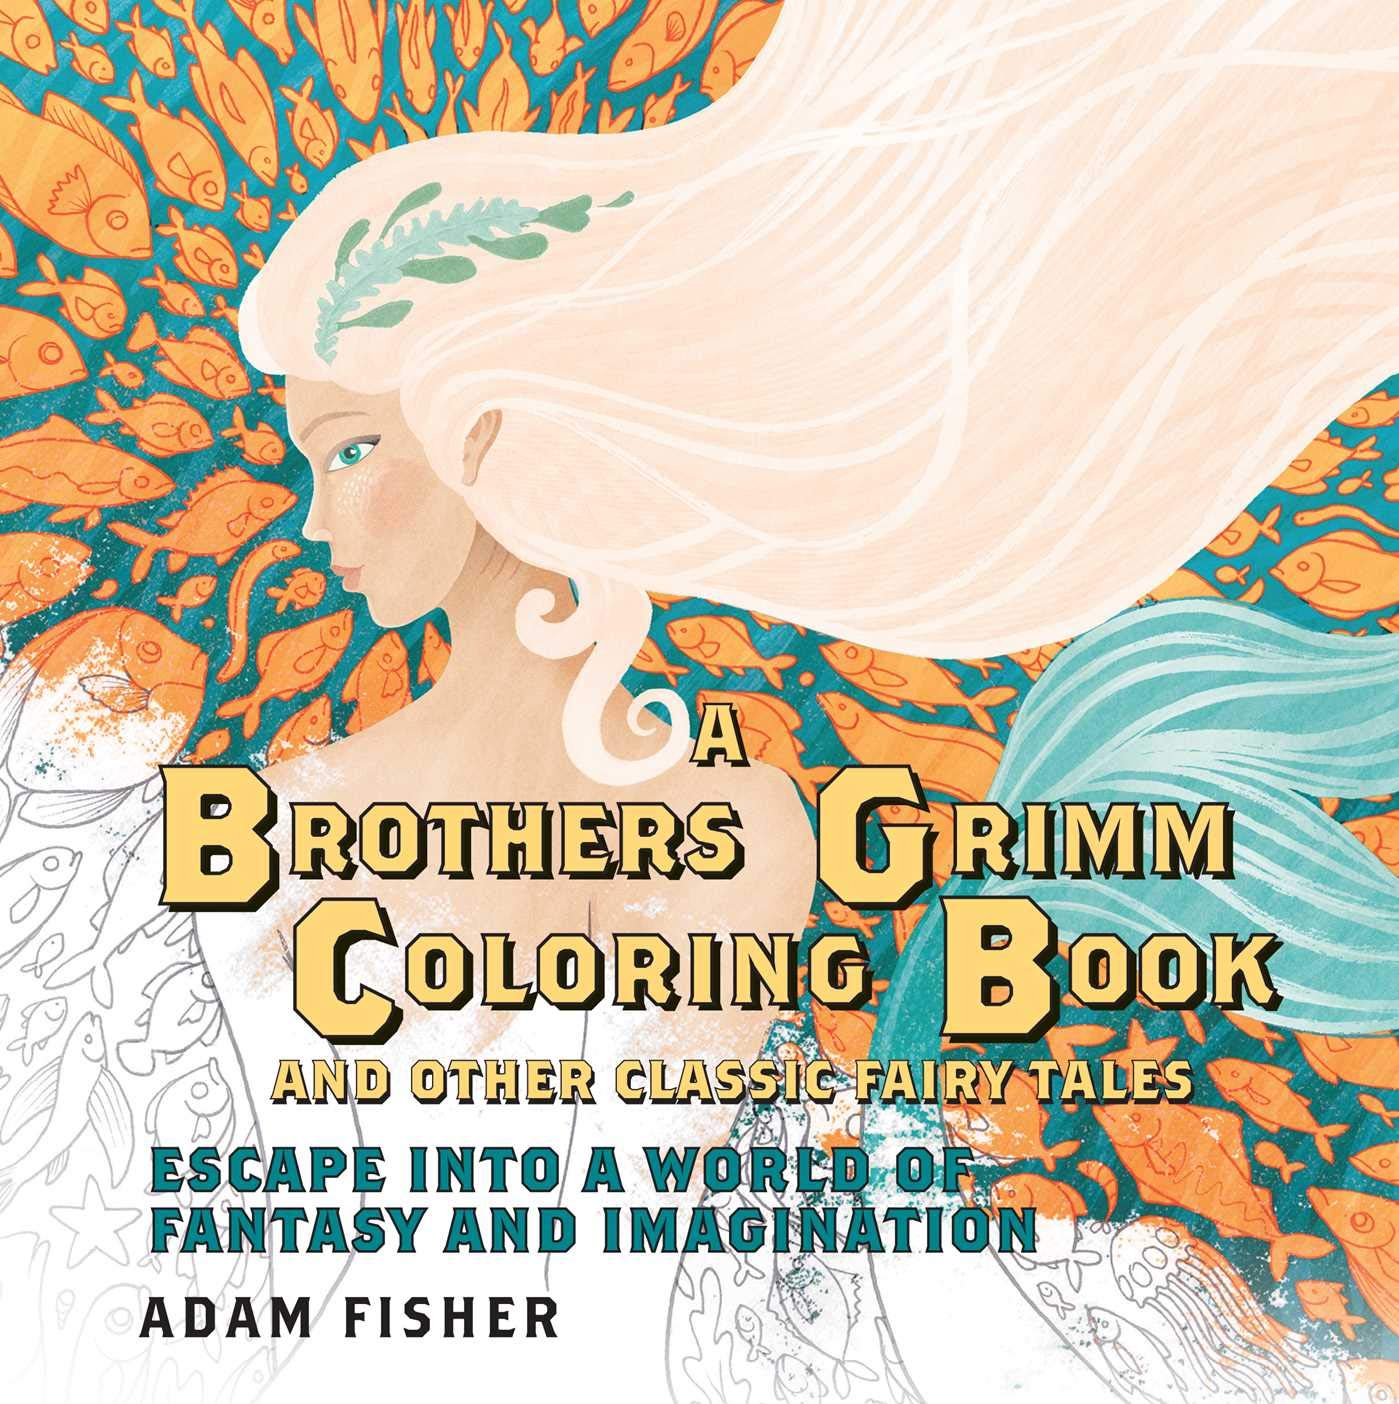 Brothers Grimm Coloring Book and Other Classic Fairy Tales